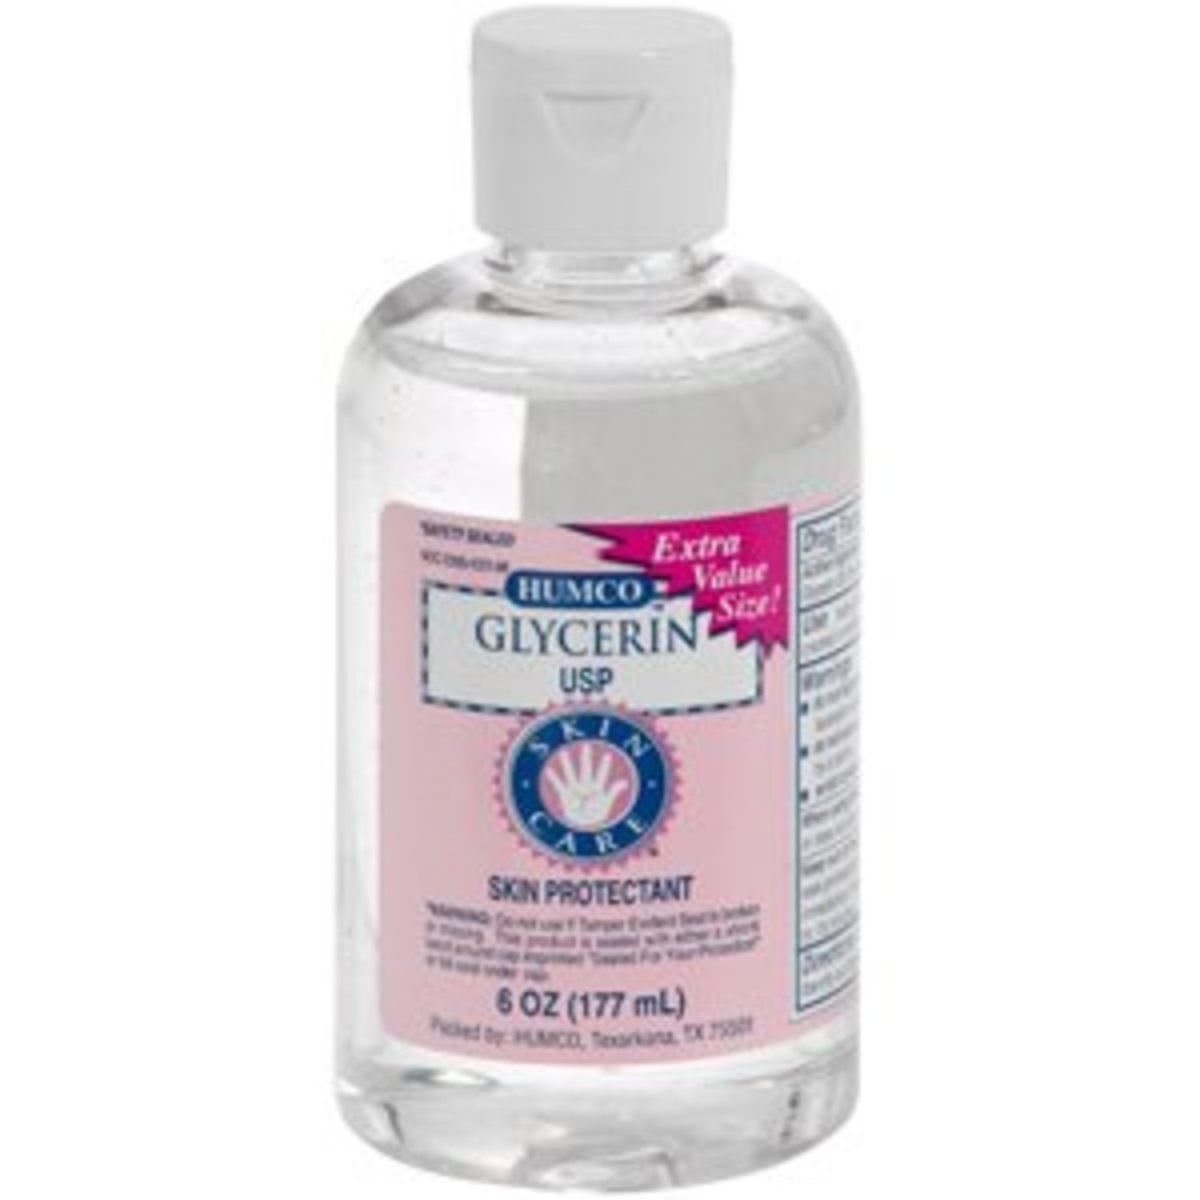 Glycerin can be found at any drugstore usually in the skincare isle.